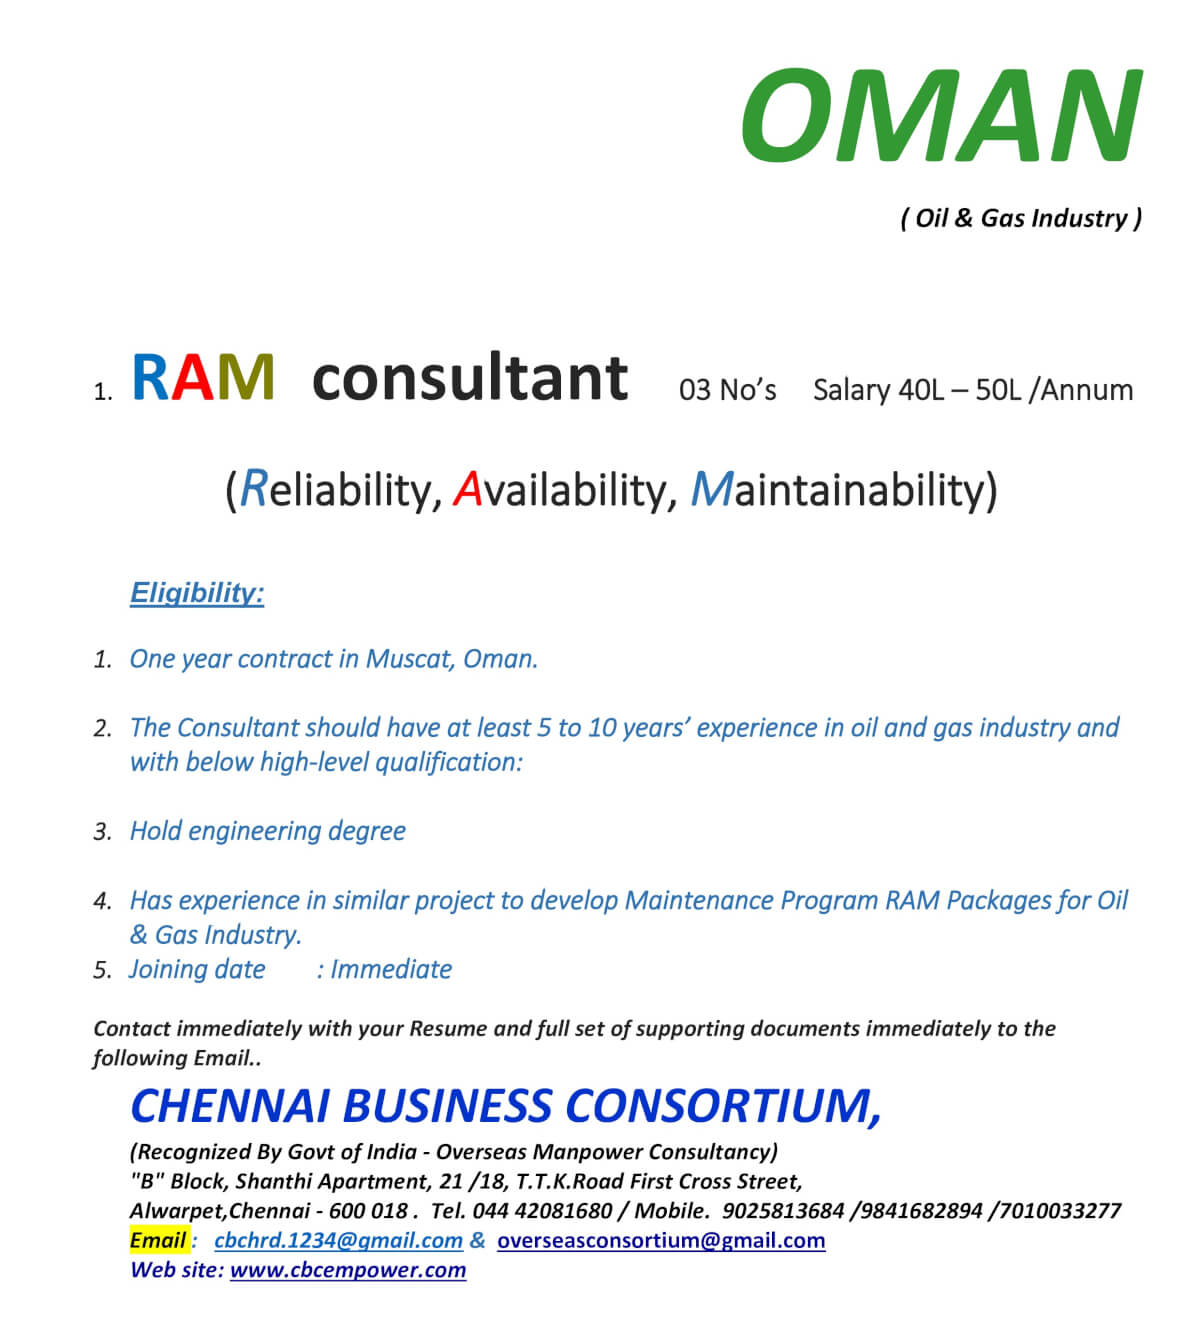 R A M CONSULTANTS ( OIL & GAS PROJECTS )